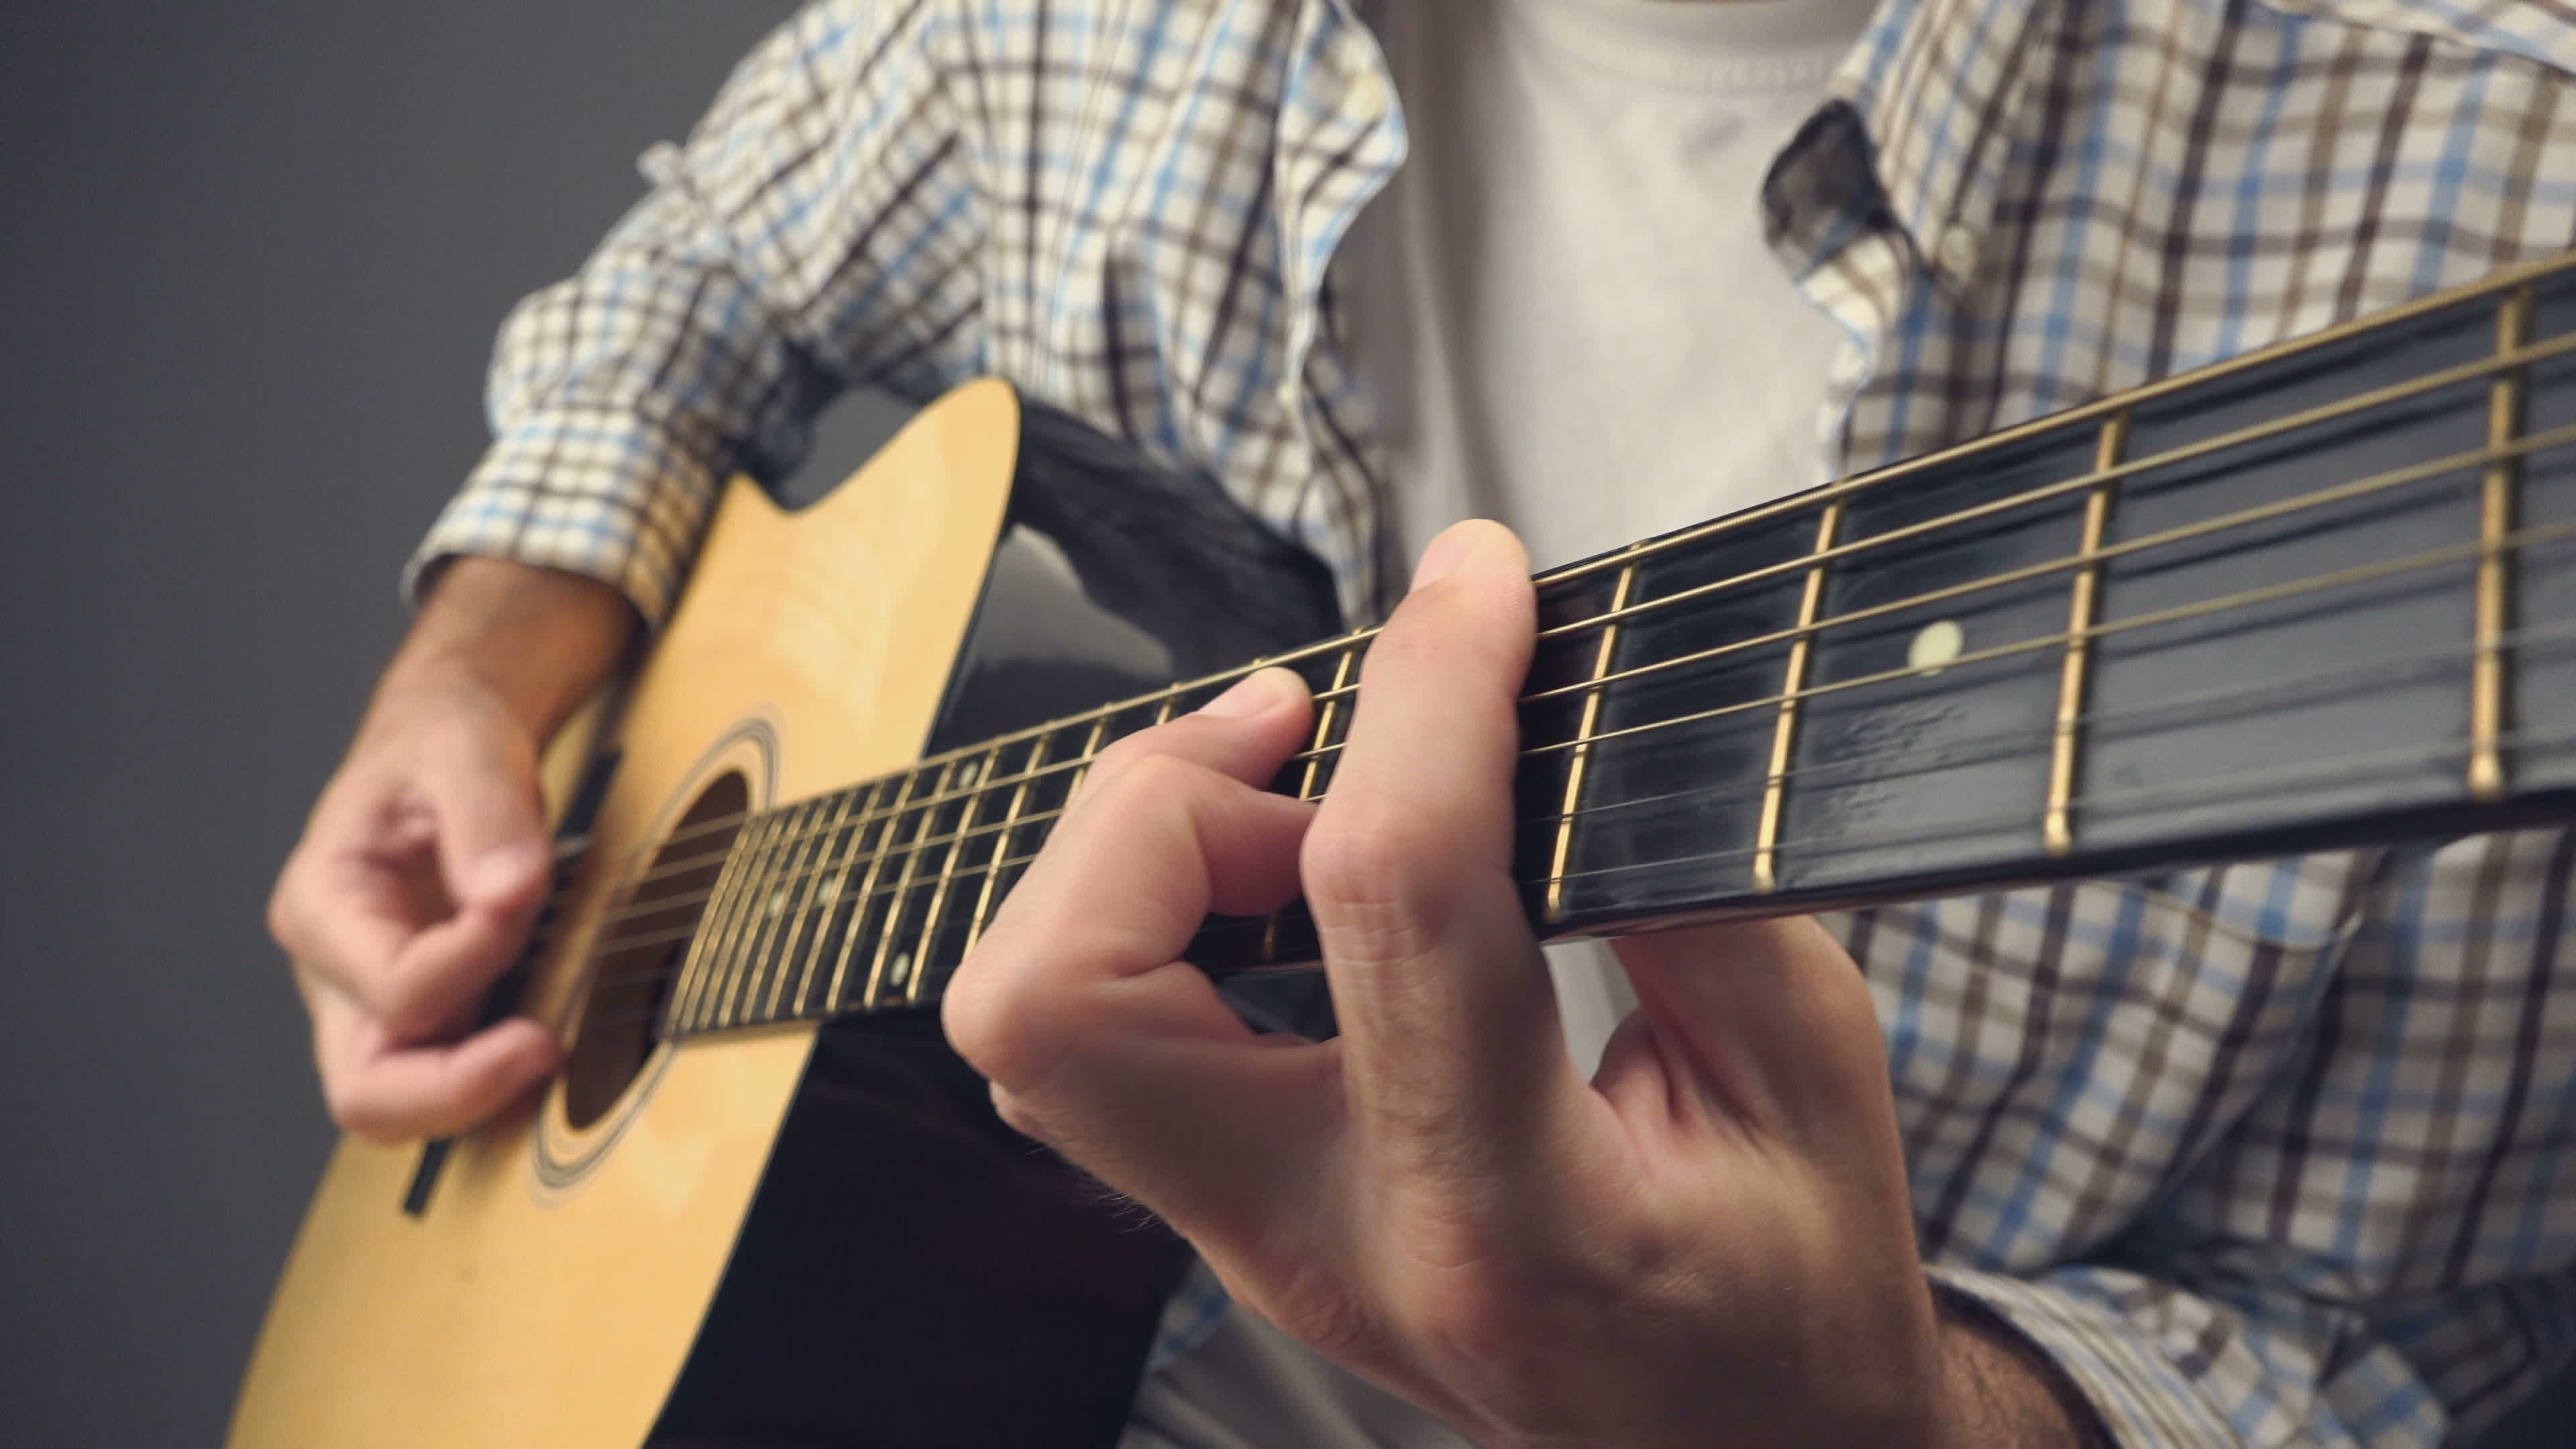 Guitar: Stringing, Man playing punk rock riff on acoustic guitar, A stringed musical instrument, Guitarist. 3840x2160 4K Background.